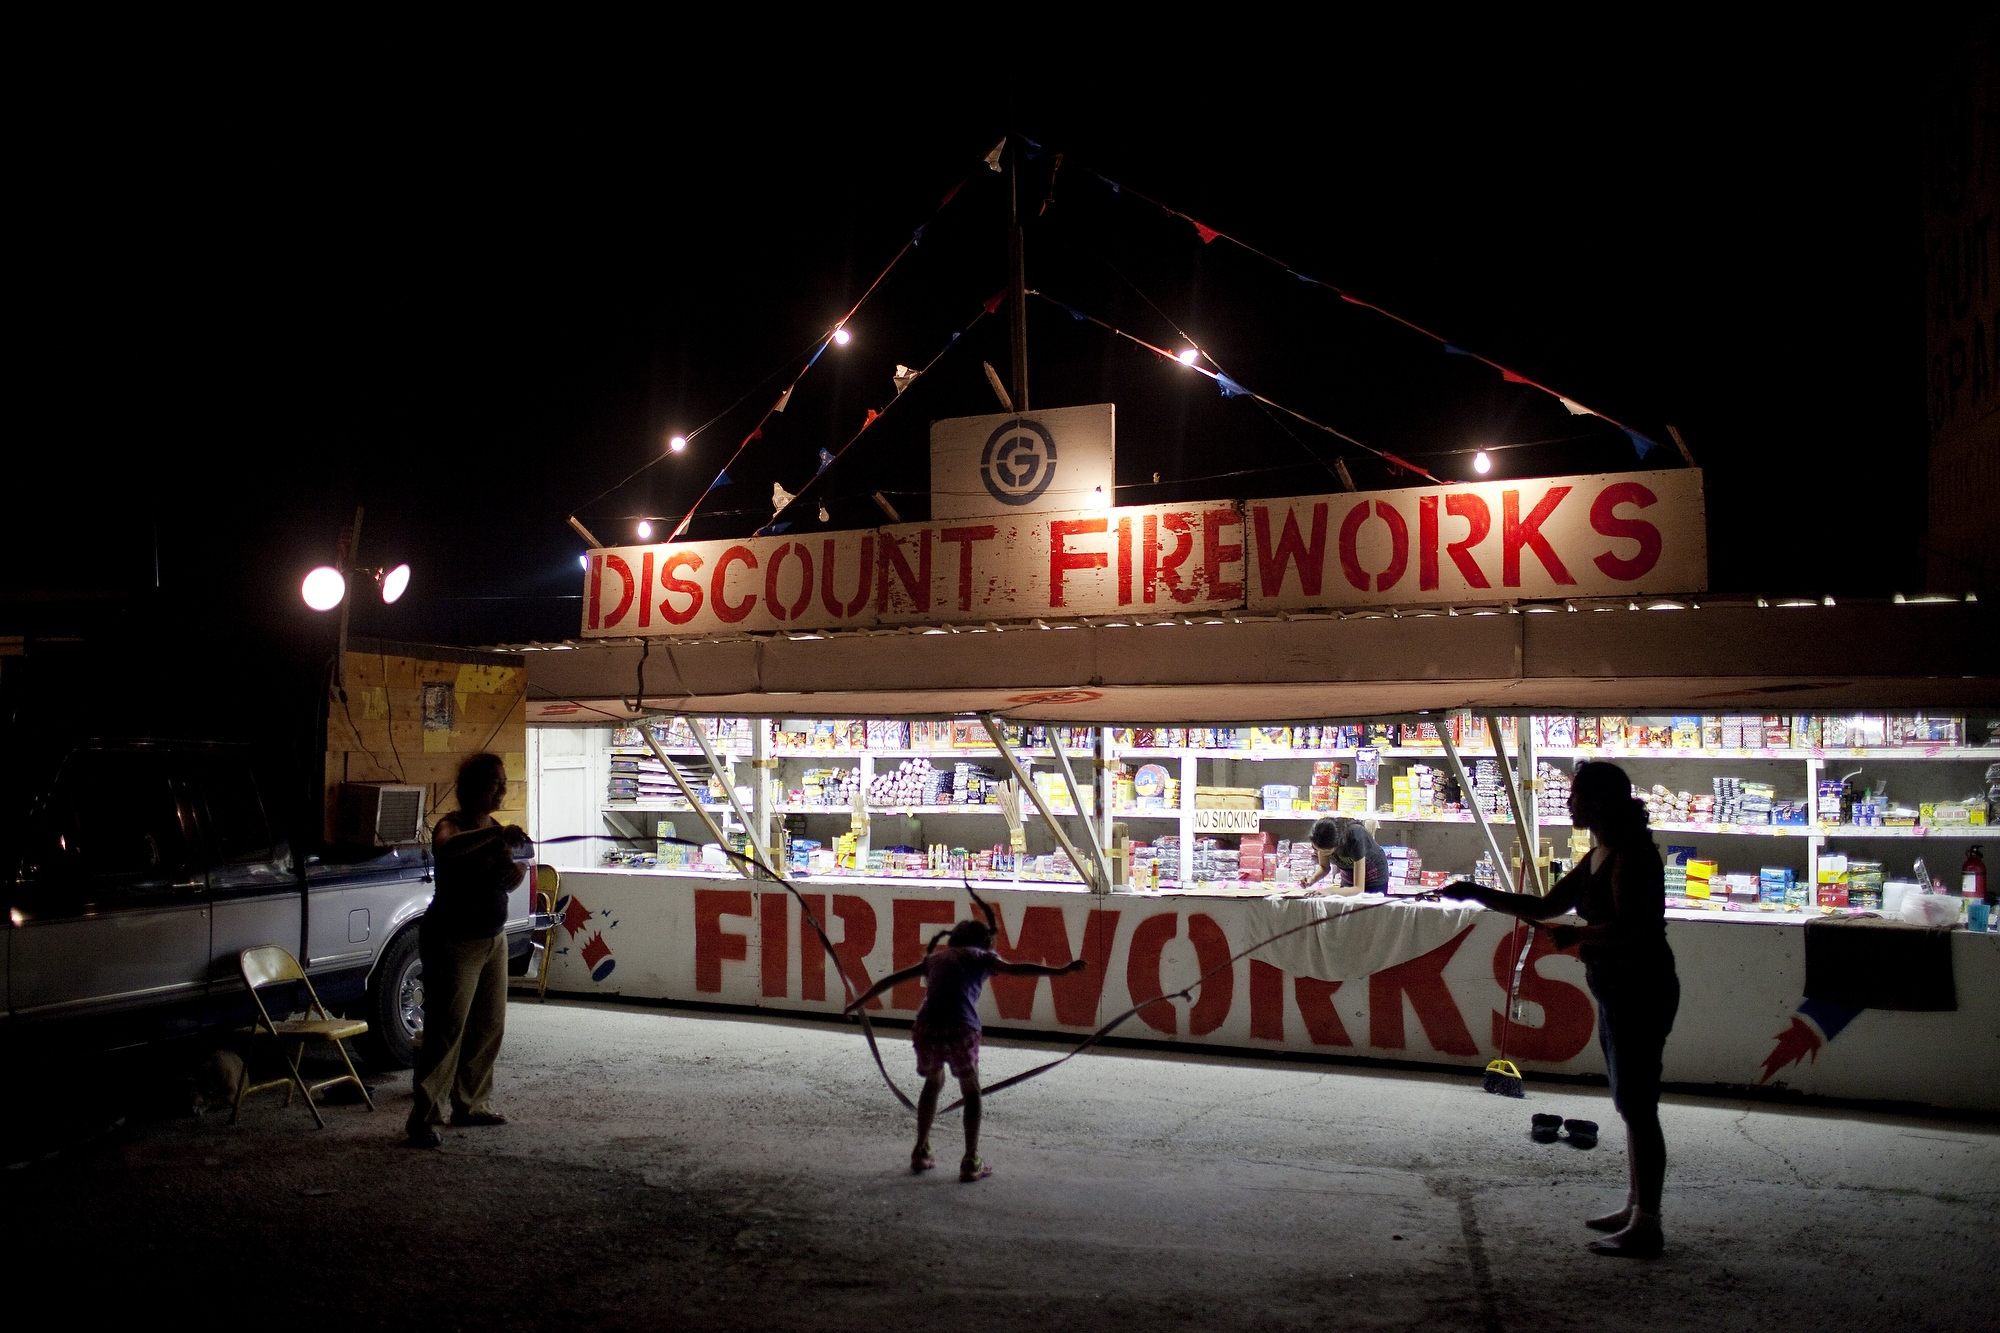 Families pass time jumping rope at their fireworks stand in Hidalgo, Texas on July 1, 2014.